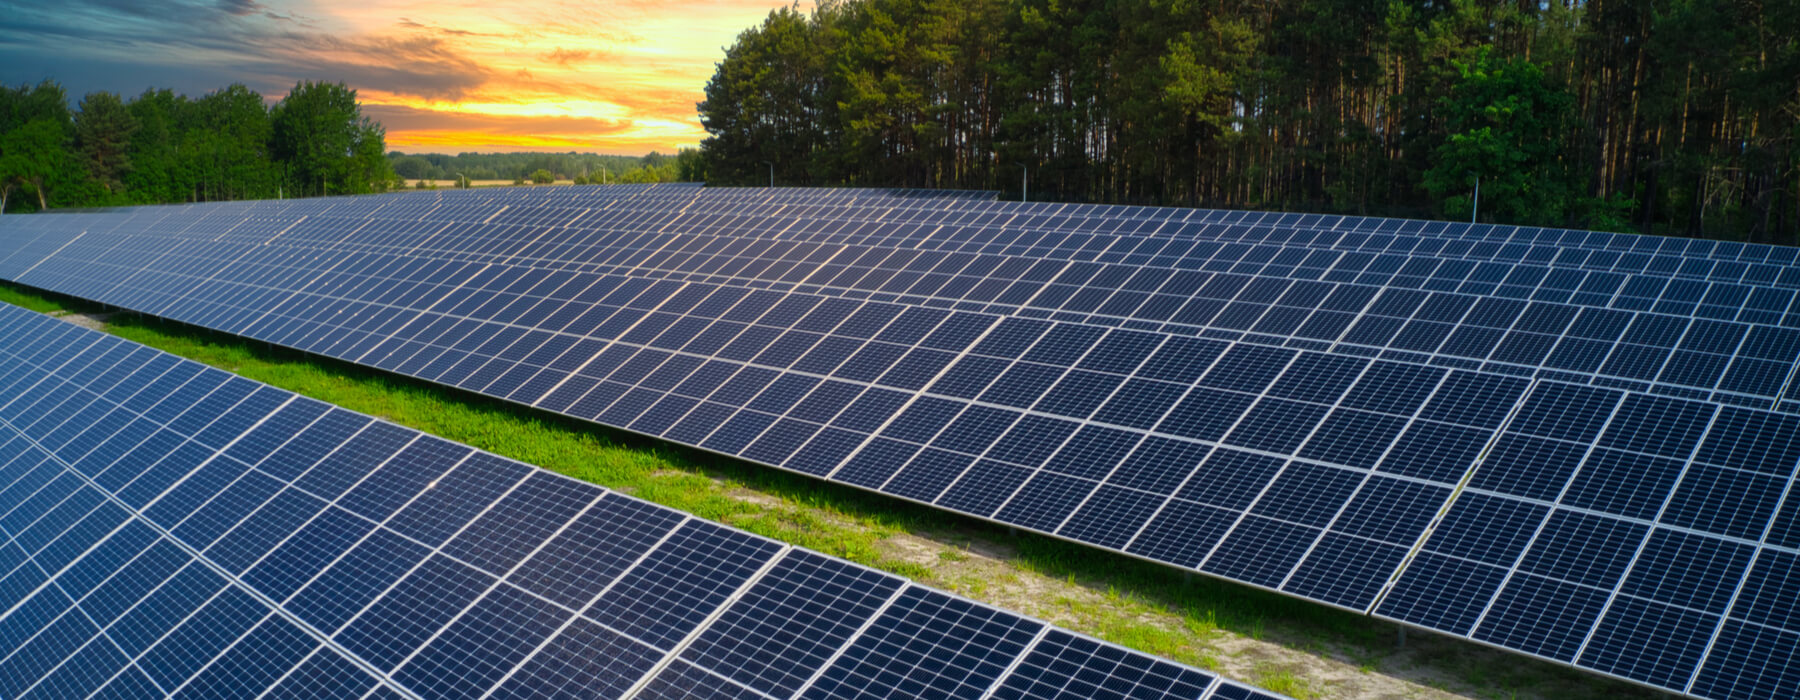 Solar Industry Update: Latest Data from the SEIA